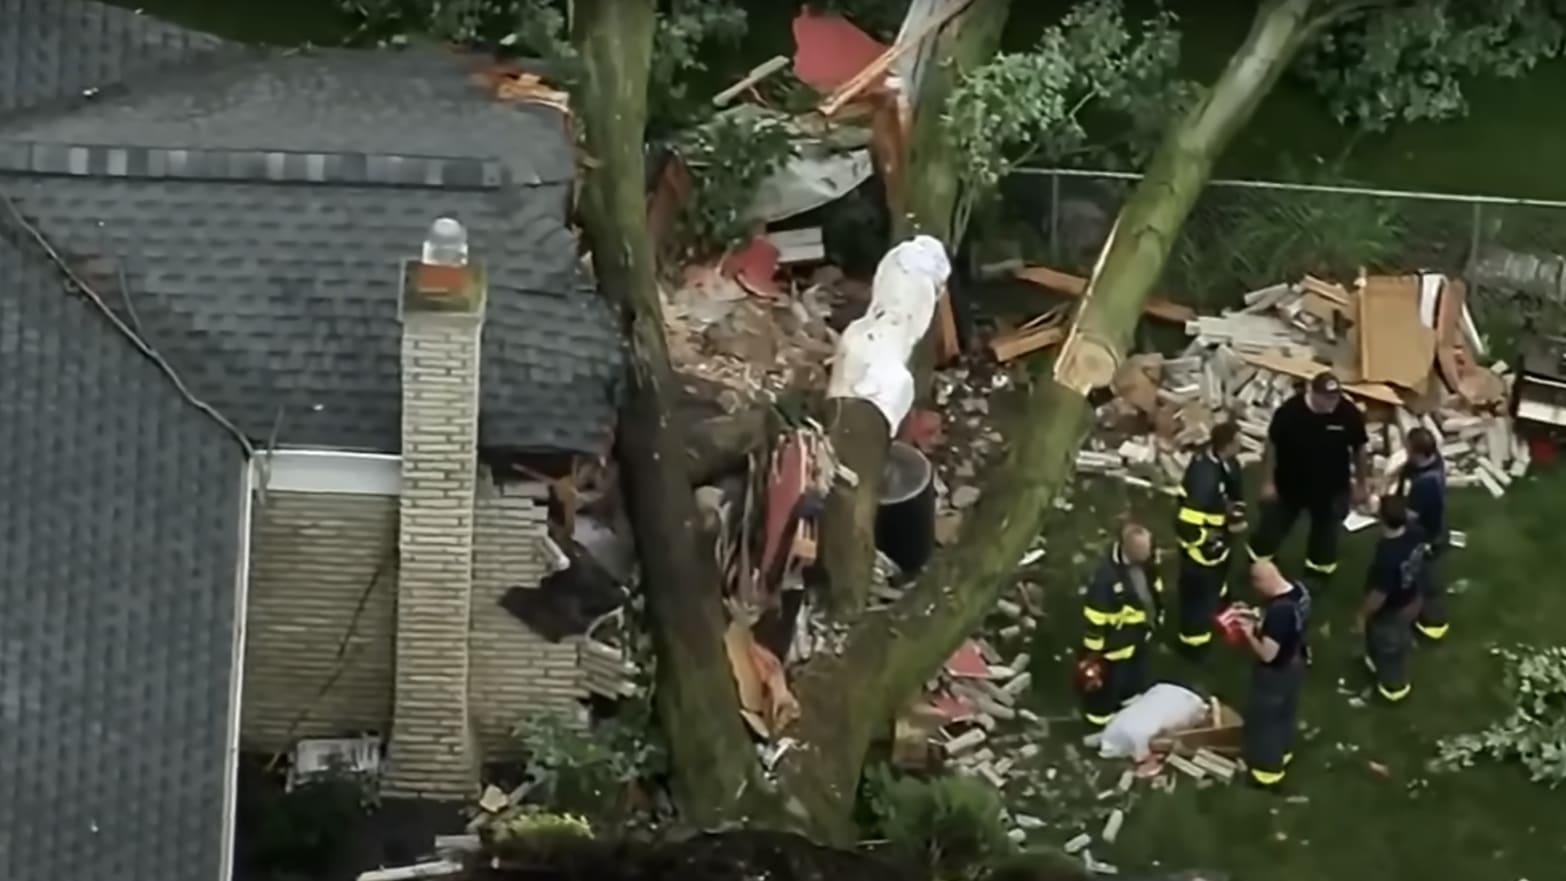 A toddler was killed when a tornado brought down a tree on a home in Livonia, Michigan.